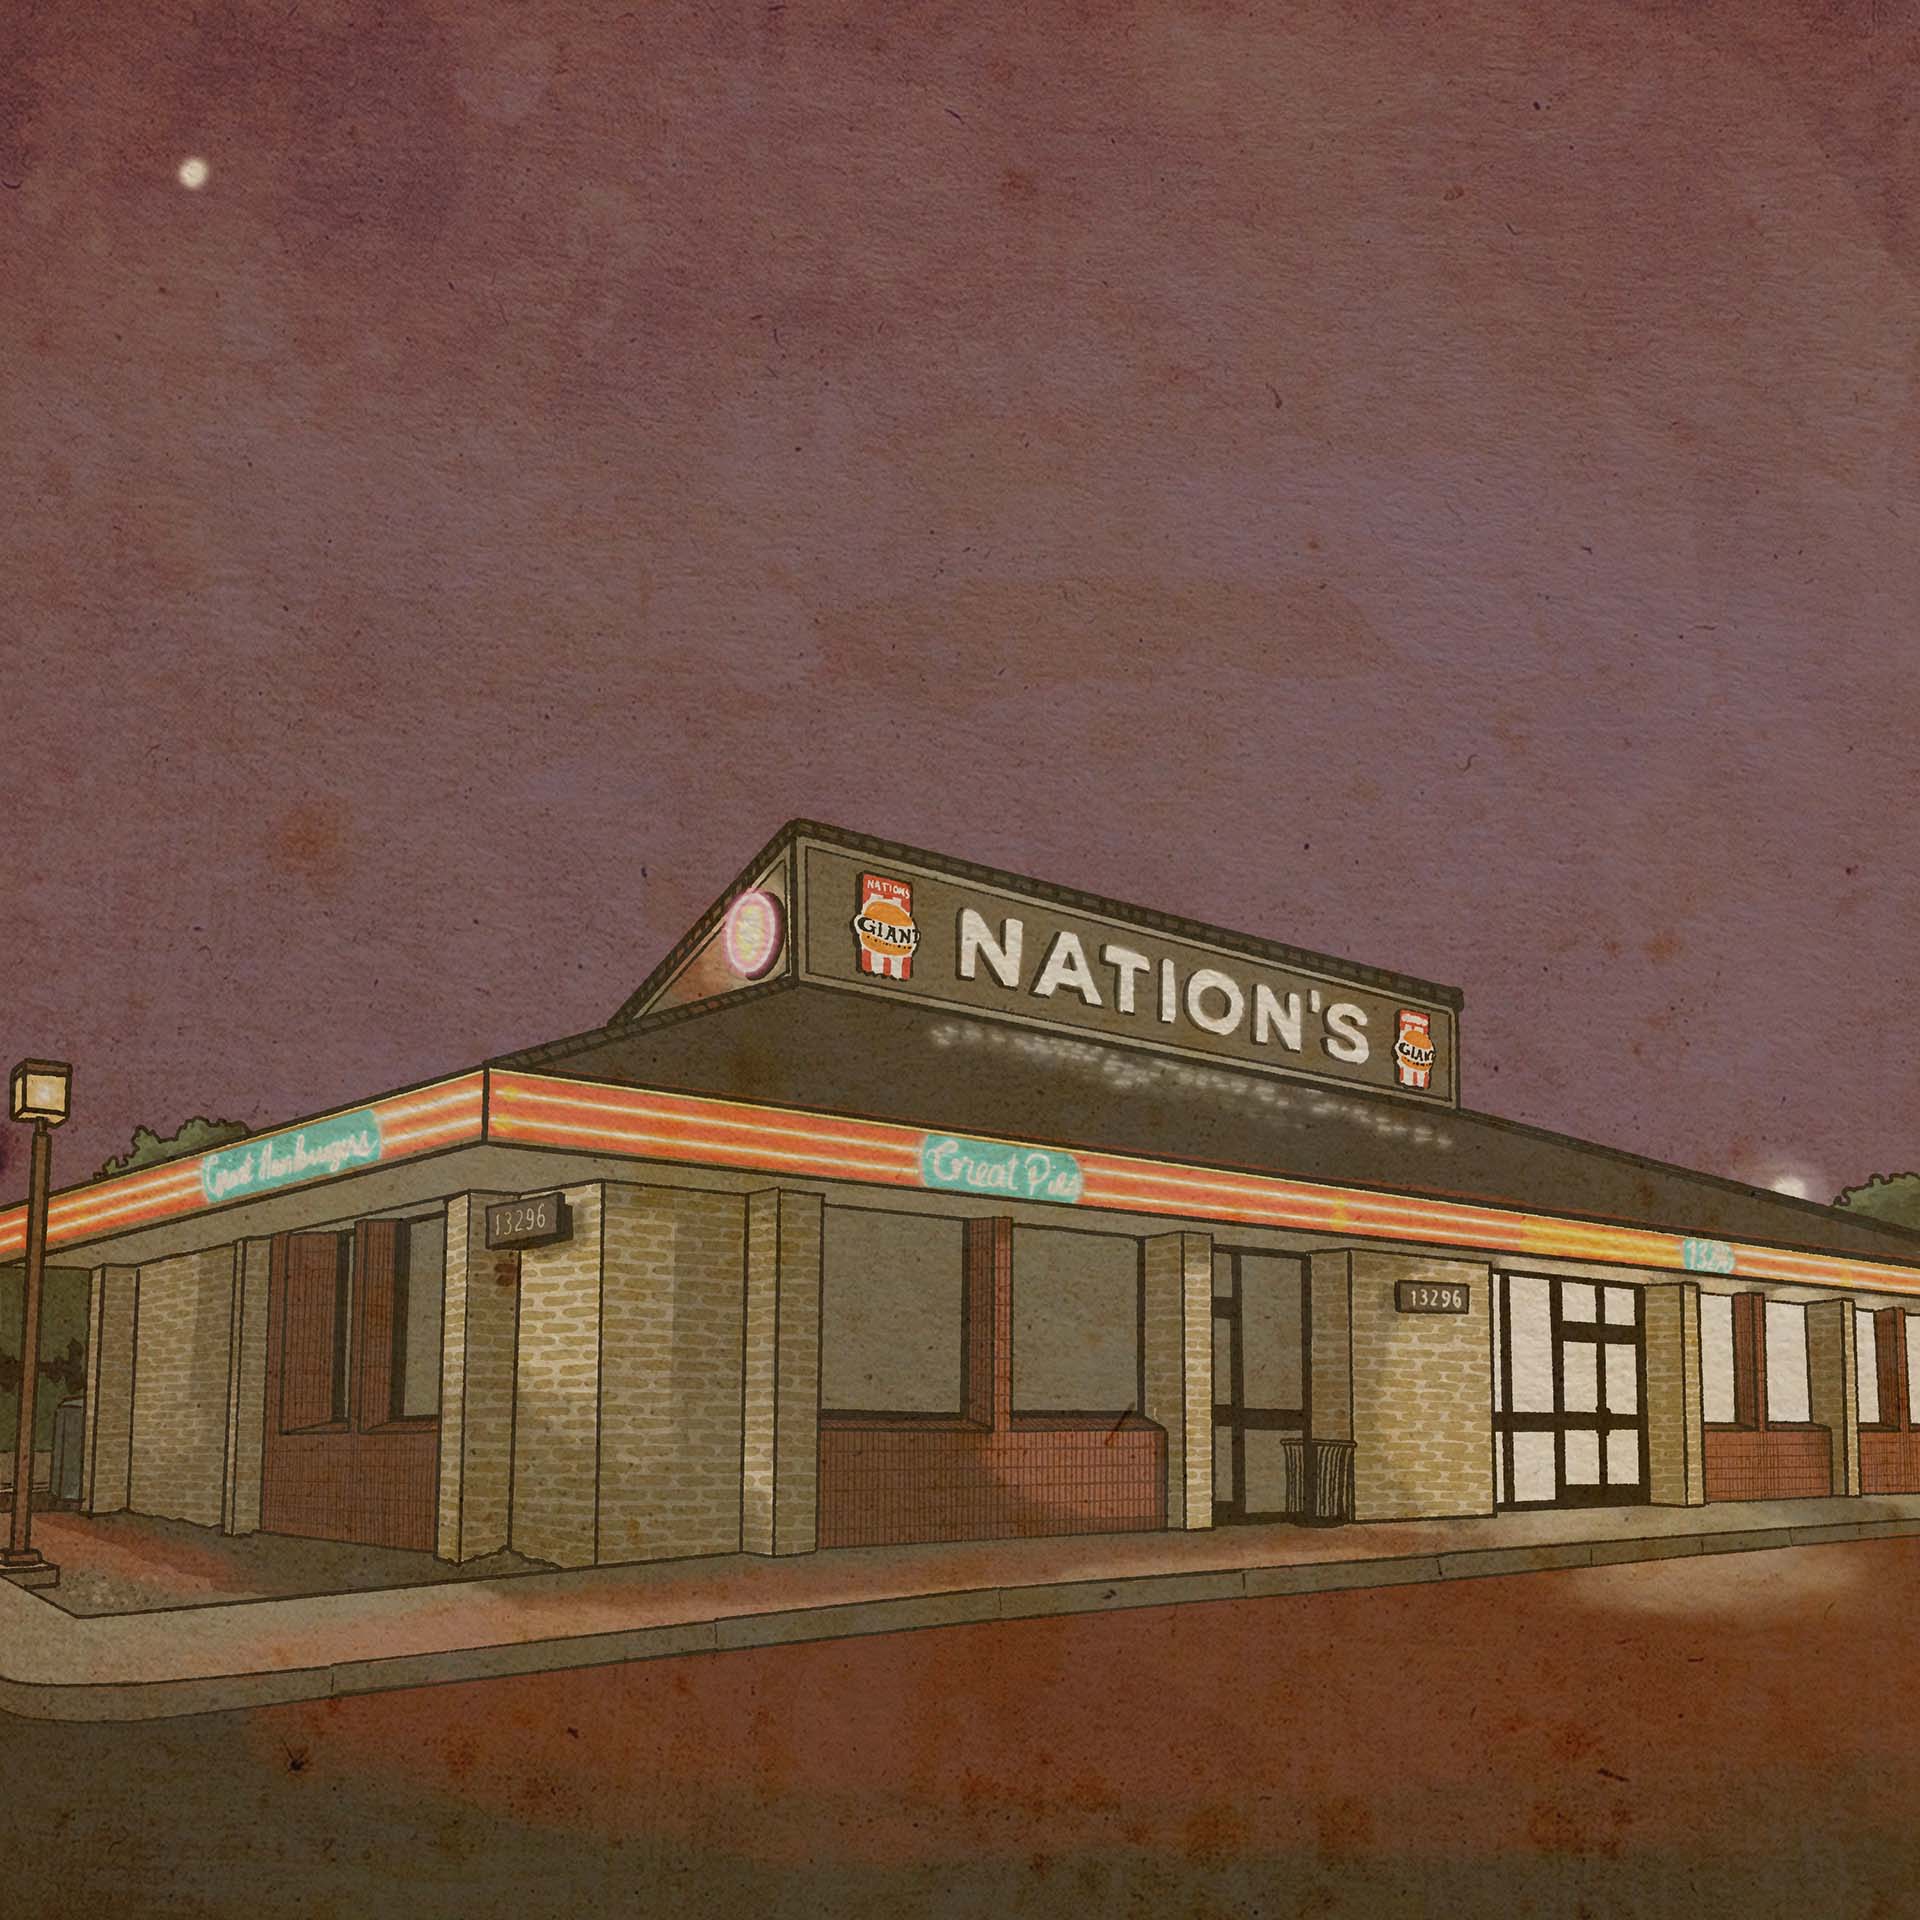 Illustration: The exterior of a Nation's fast food burger restaurant, lit up in neon at night.